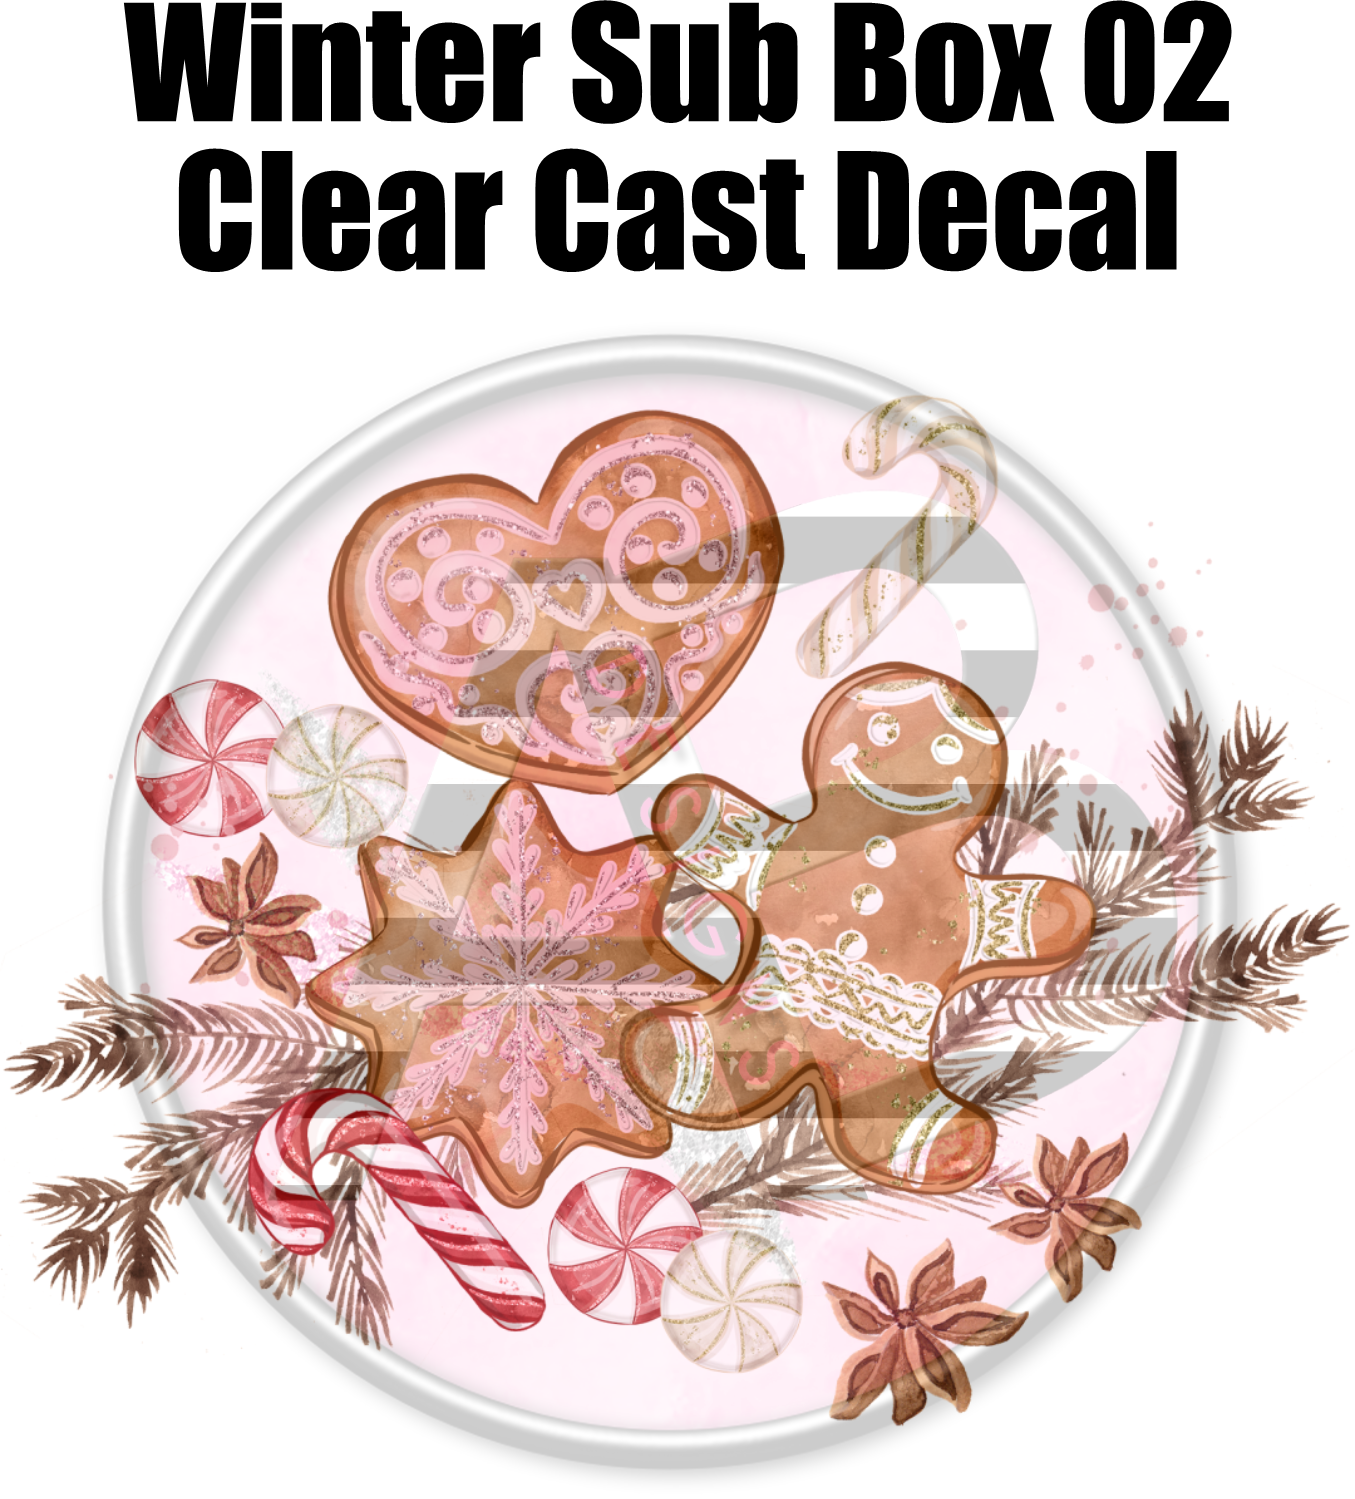 Winter Sub Box Decal 02 - Clear Cast Decal